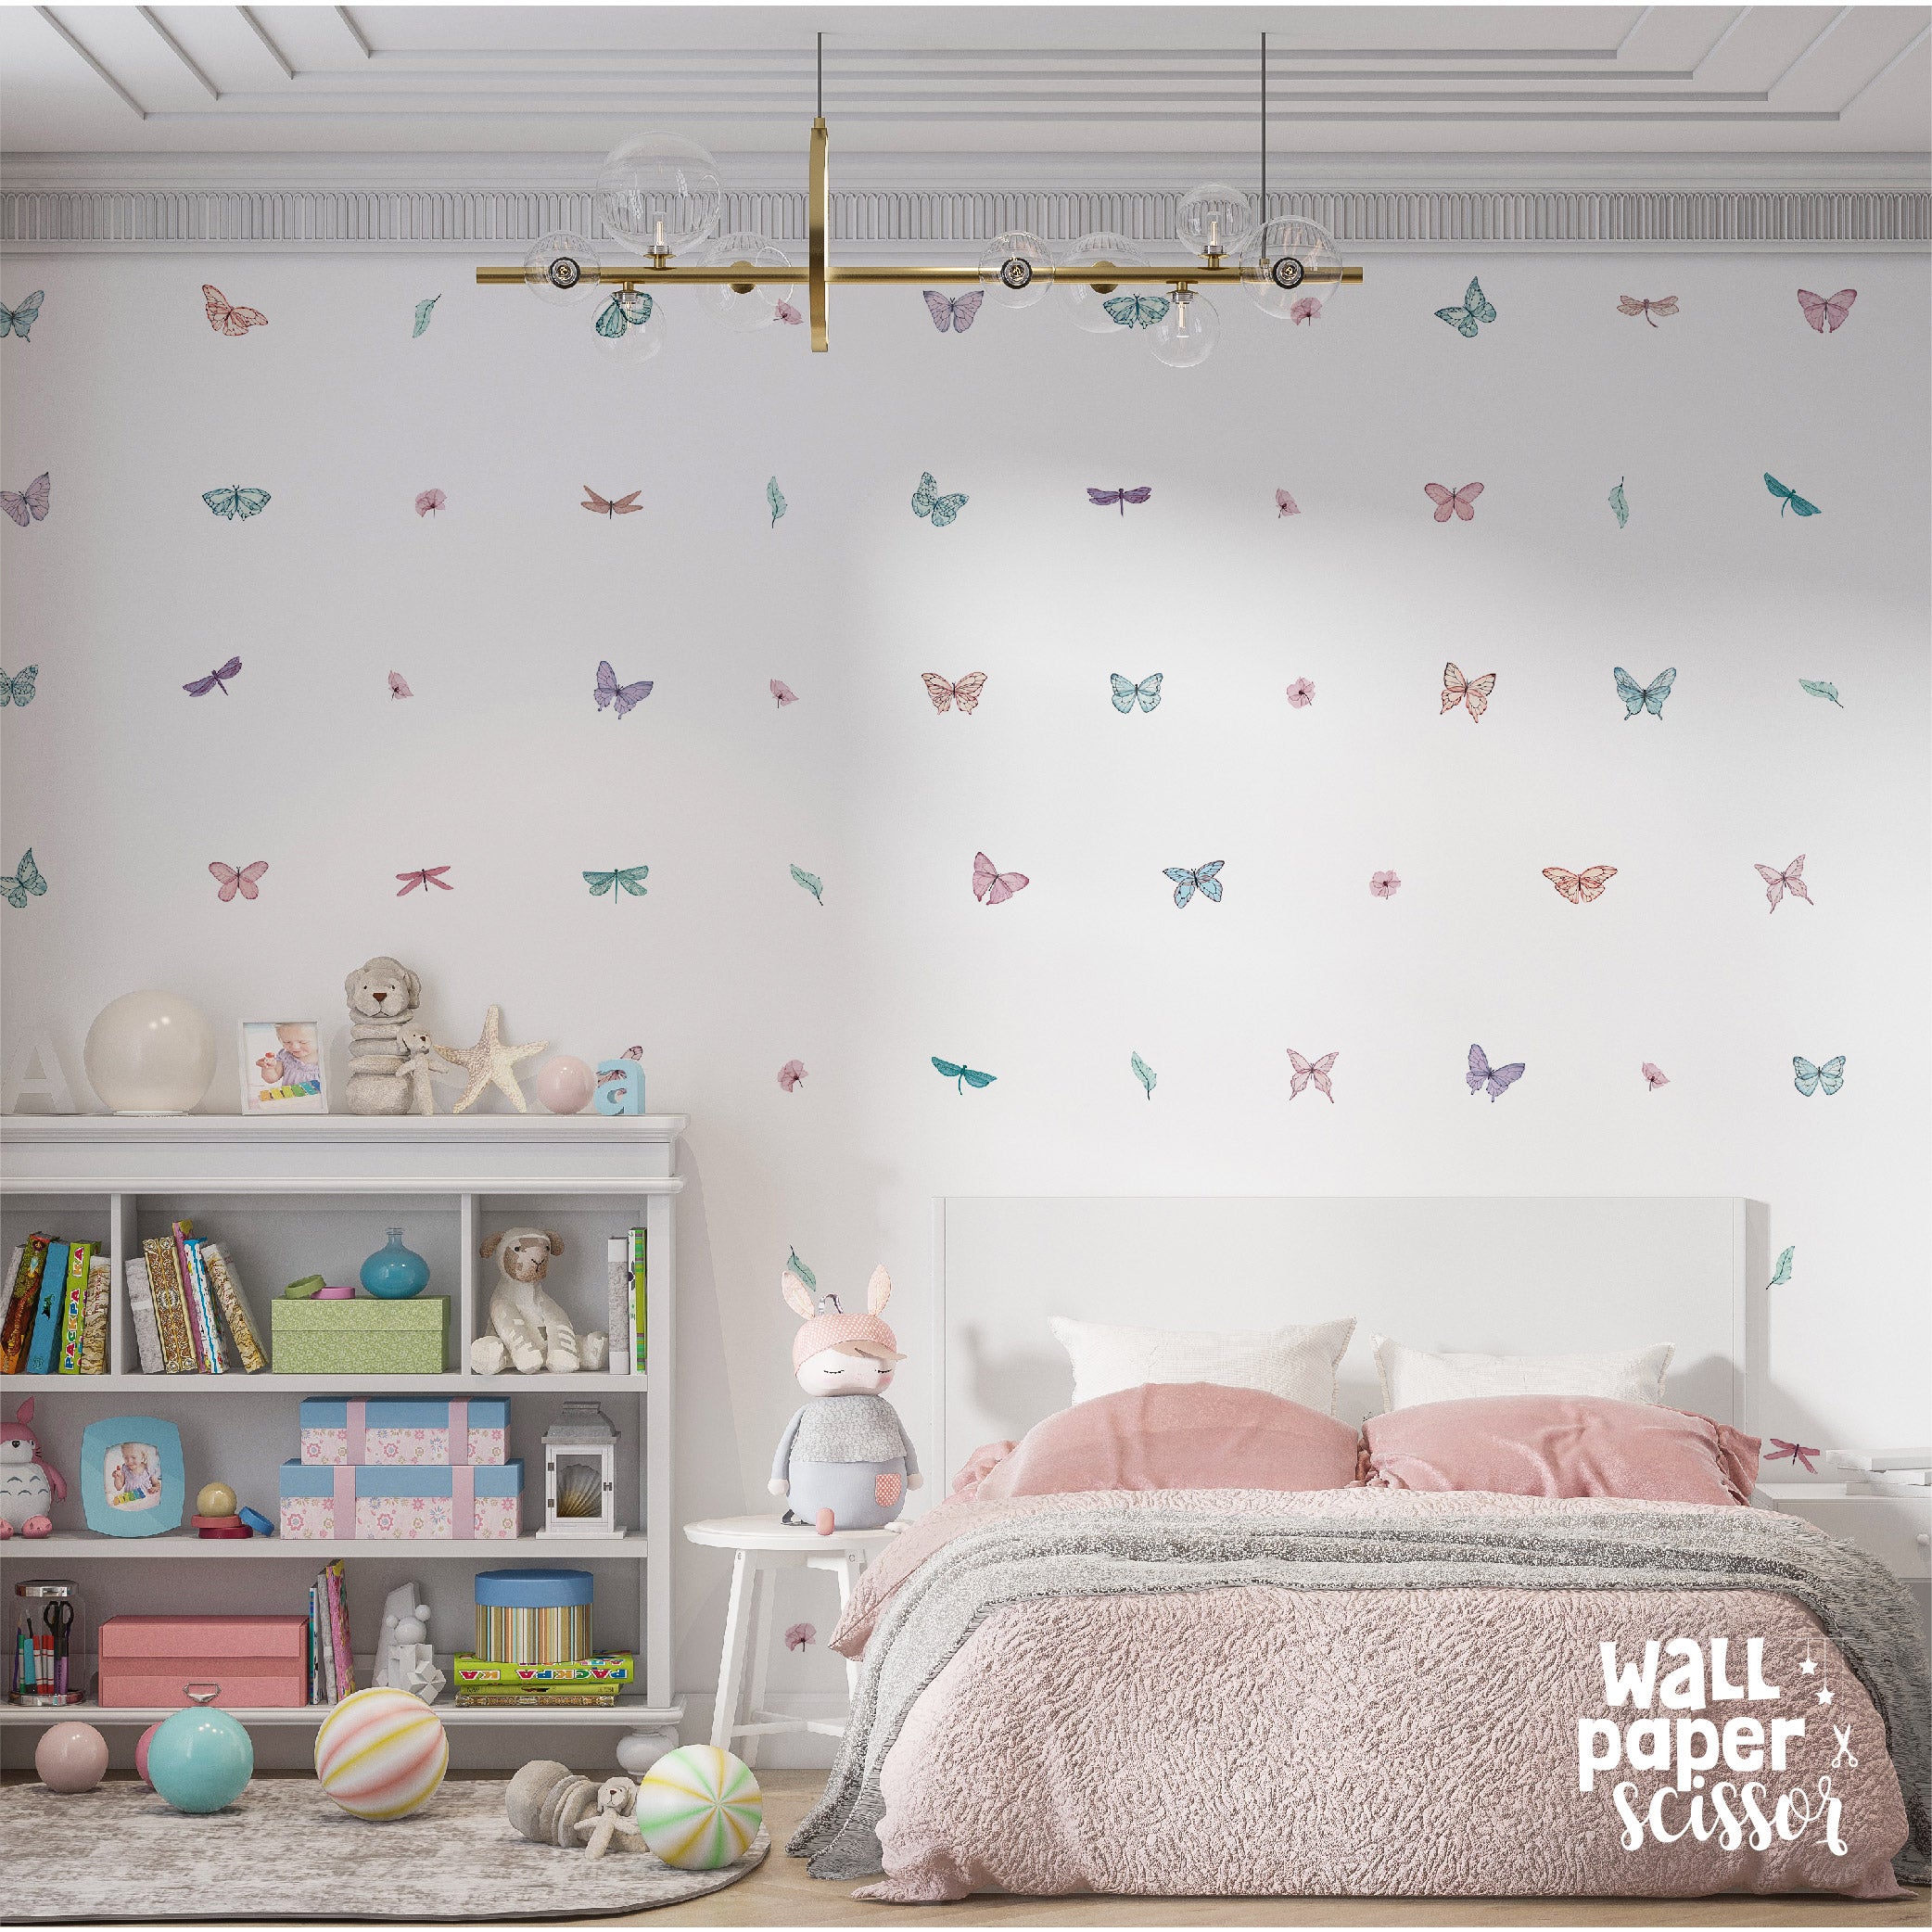 Watercolour Butterfly Wall Stickers